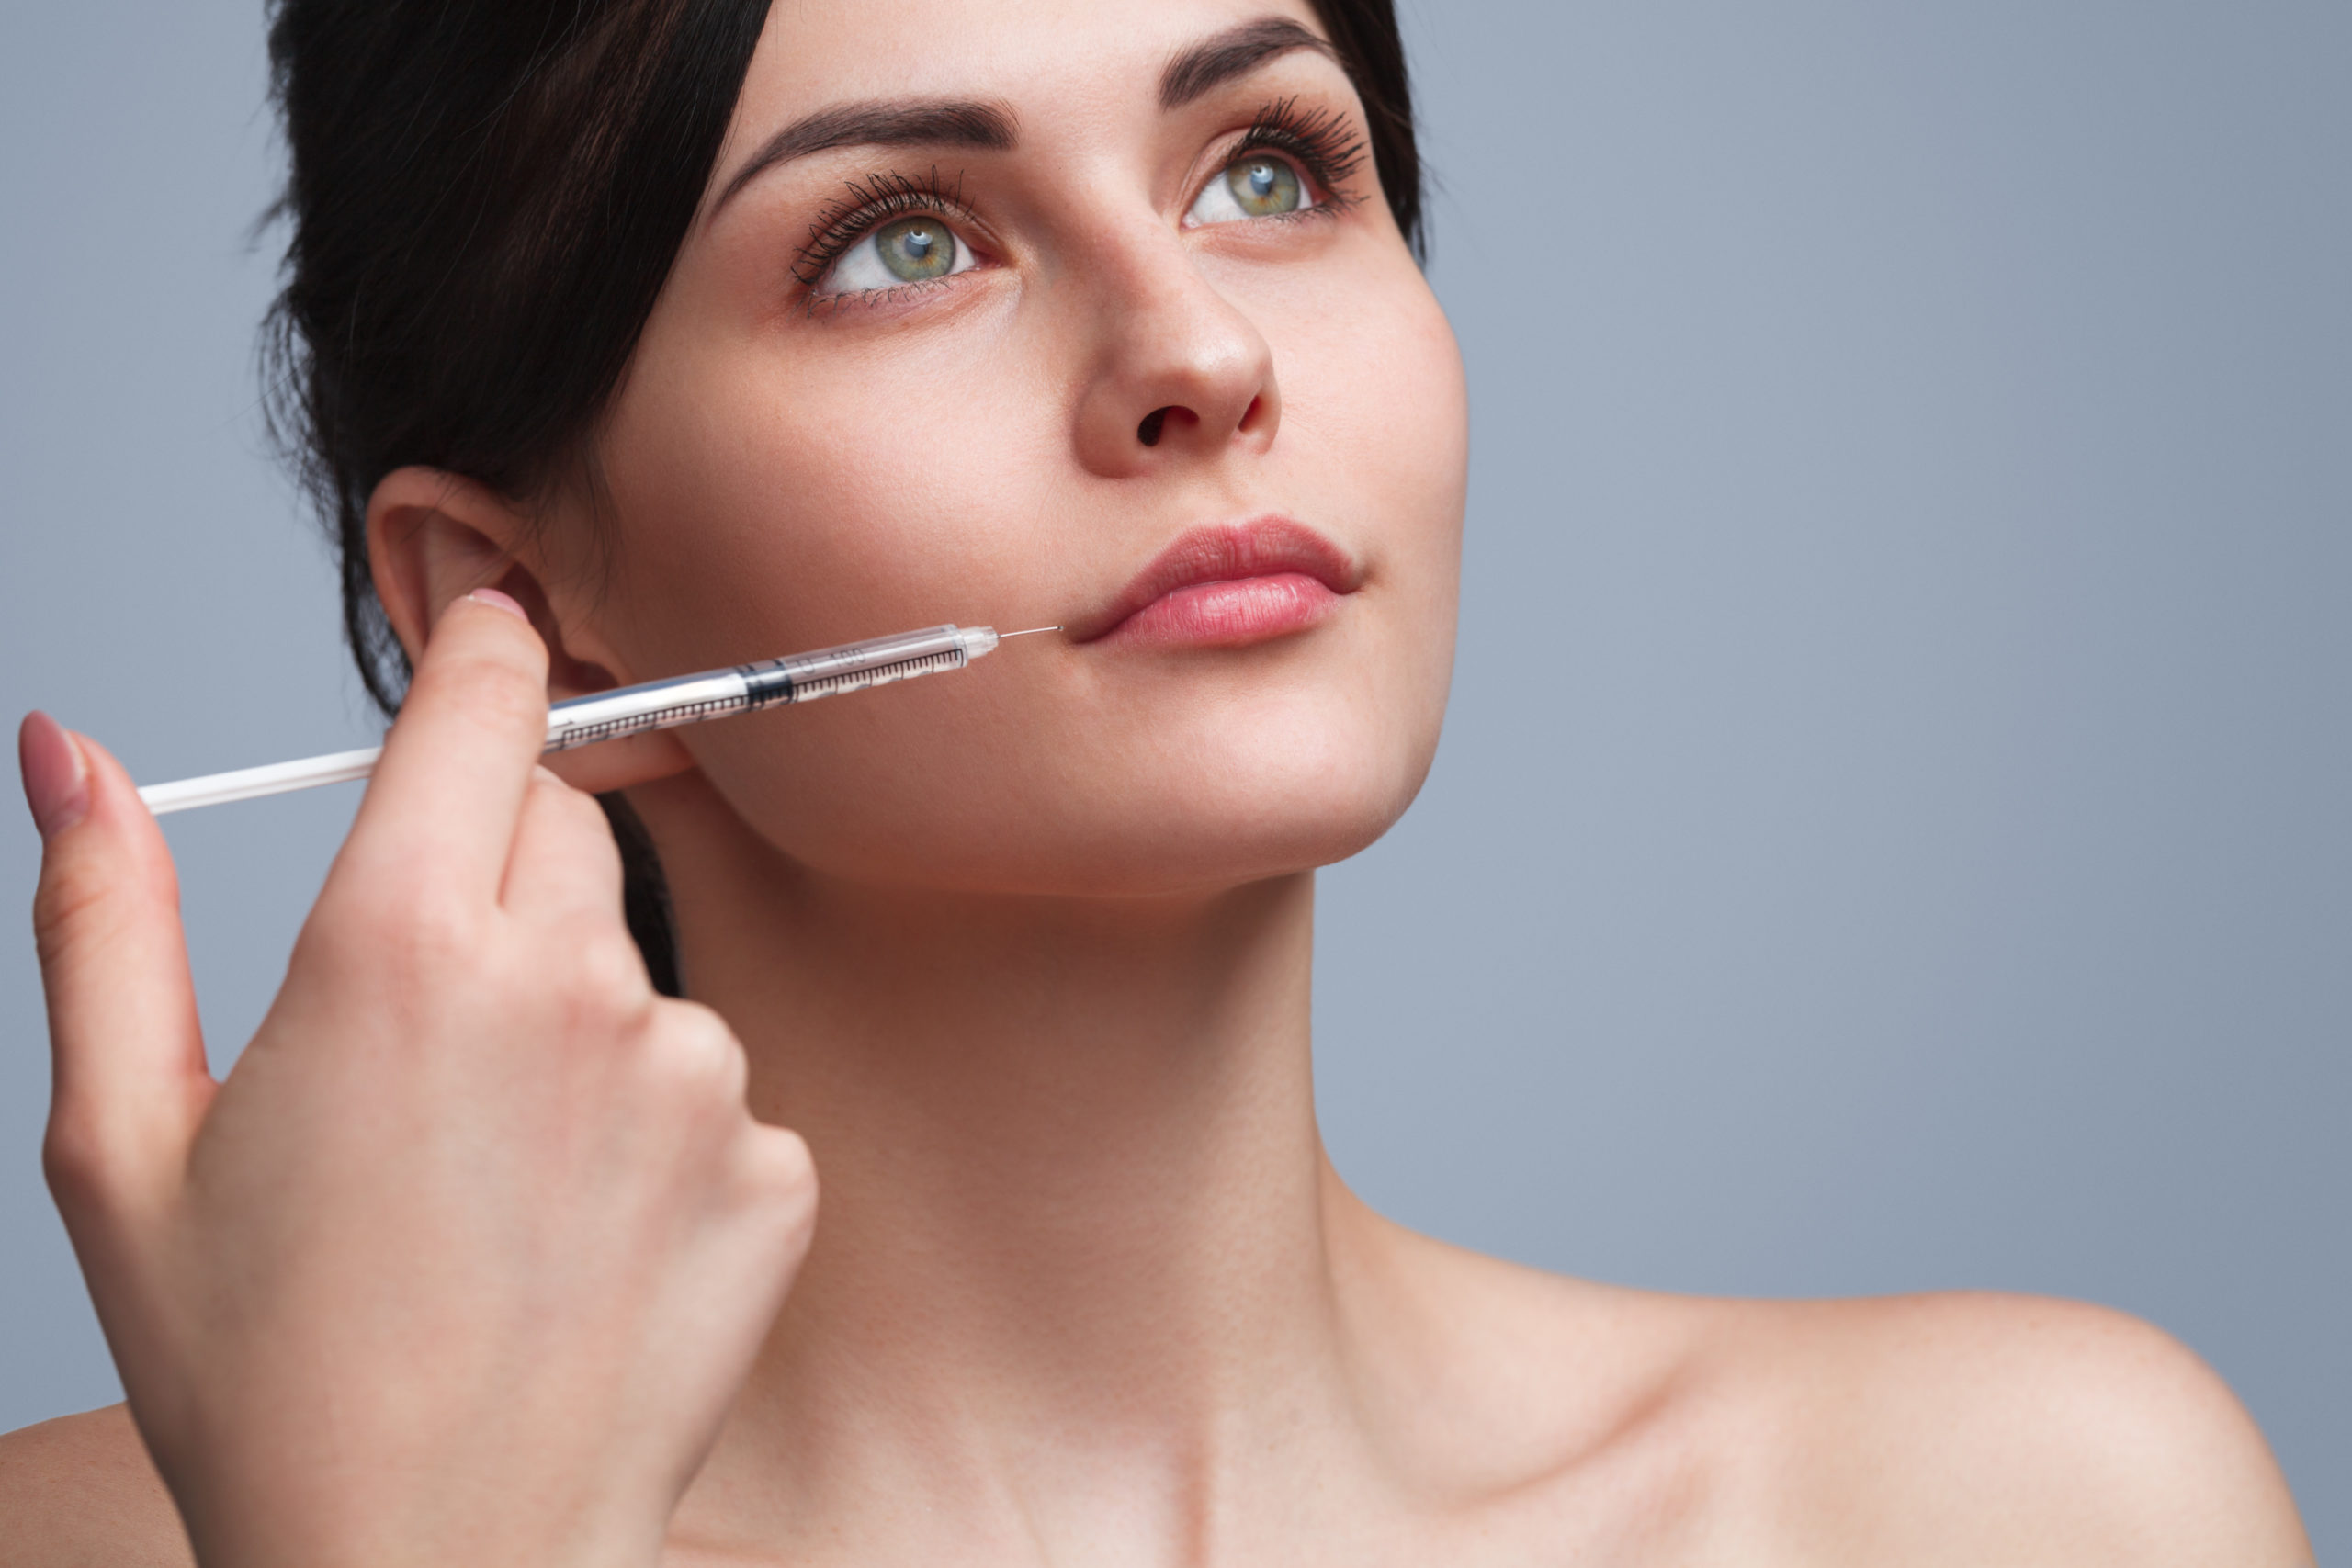 A Lady with dermal filler treatment injection | SOSA Medical Aesthetics in Tampa, FL